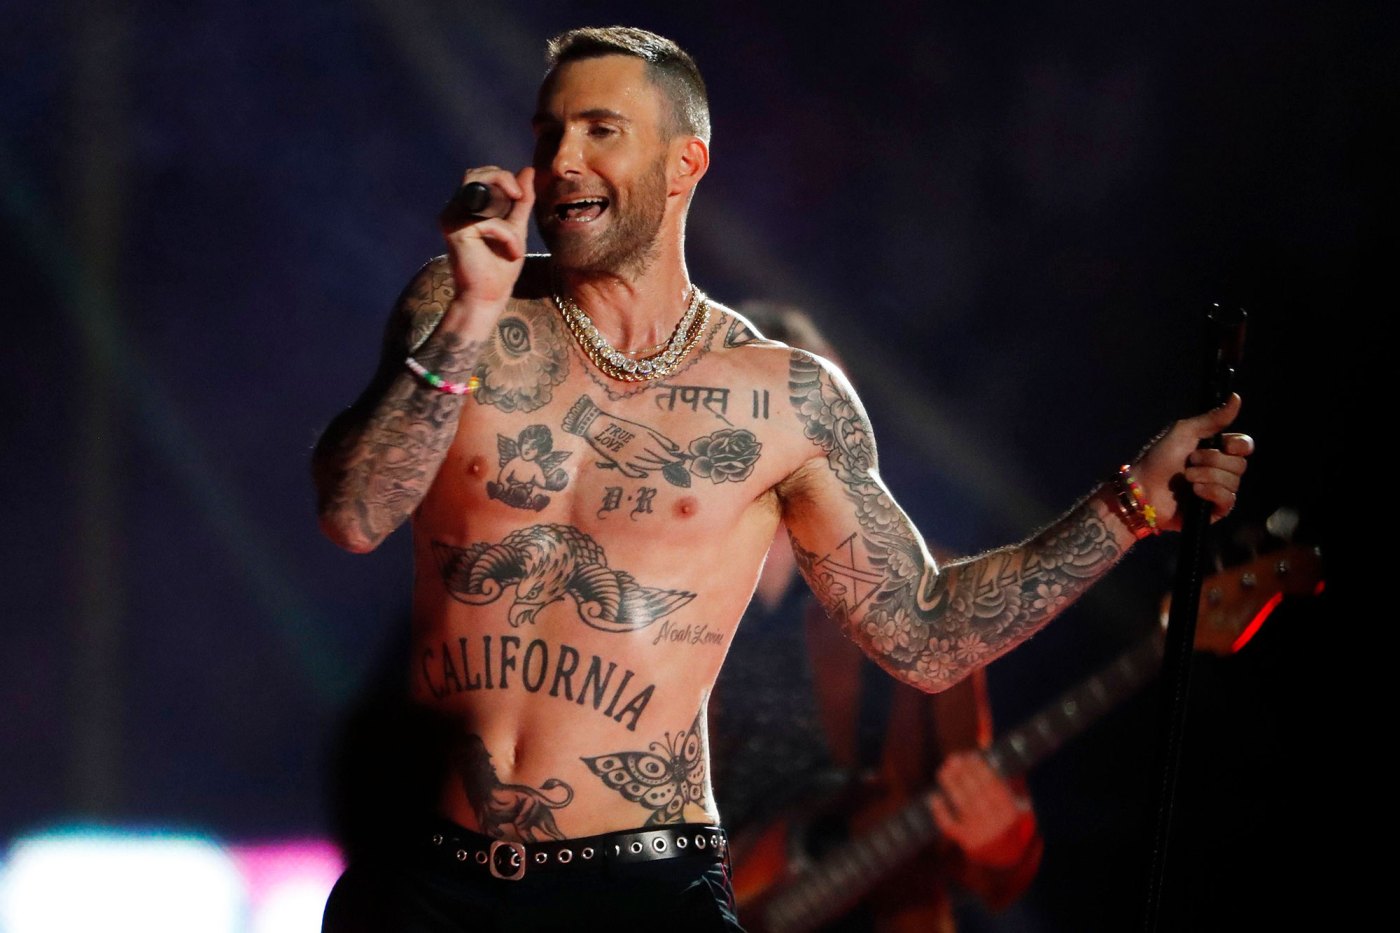 Adam Levine Dyes His Hair Blue, and Fans Are Freaking Out - wide 2